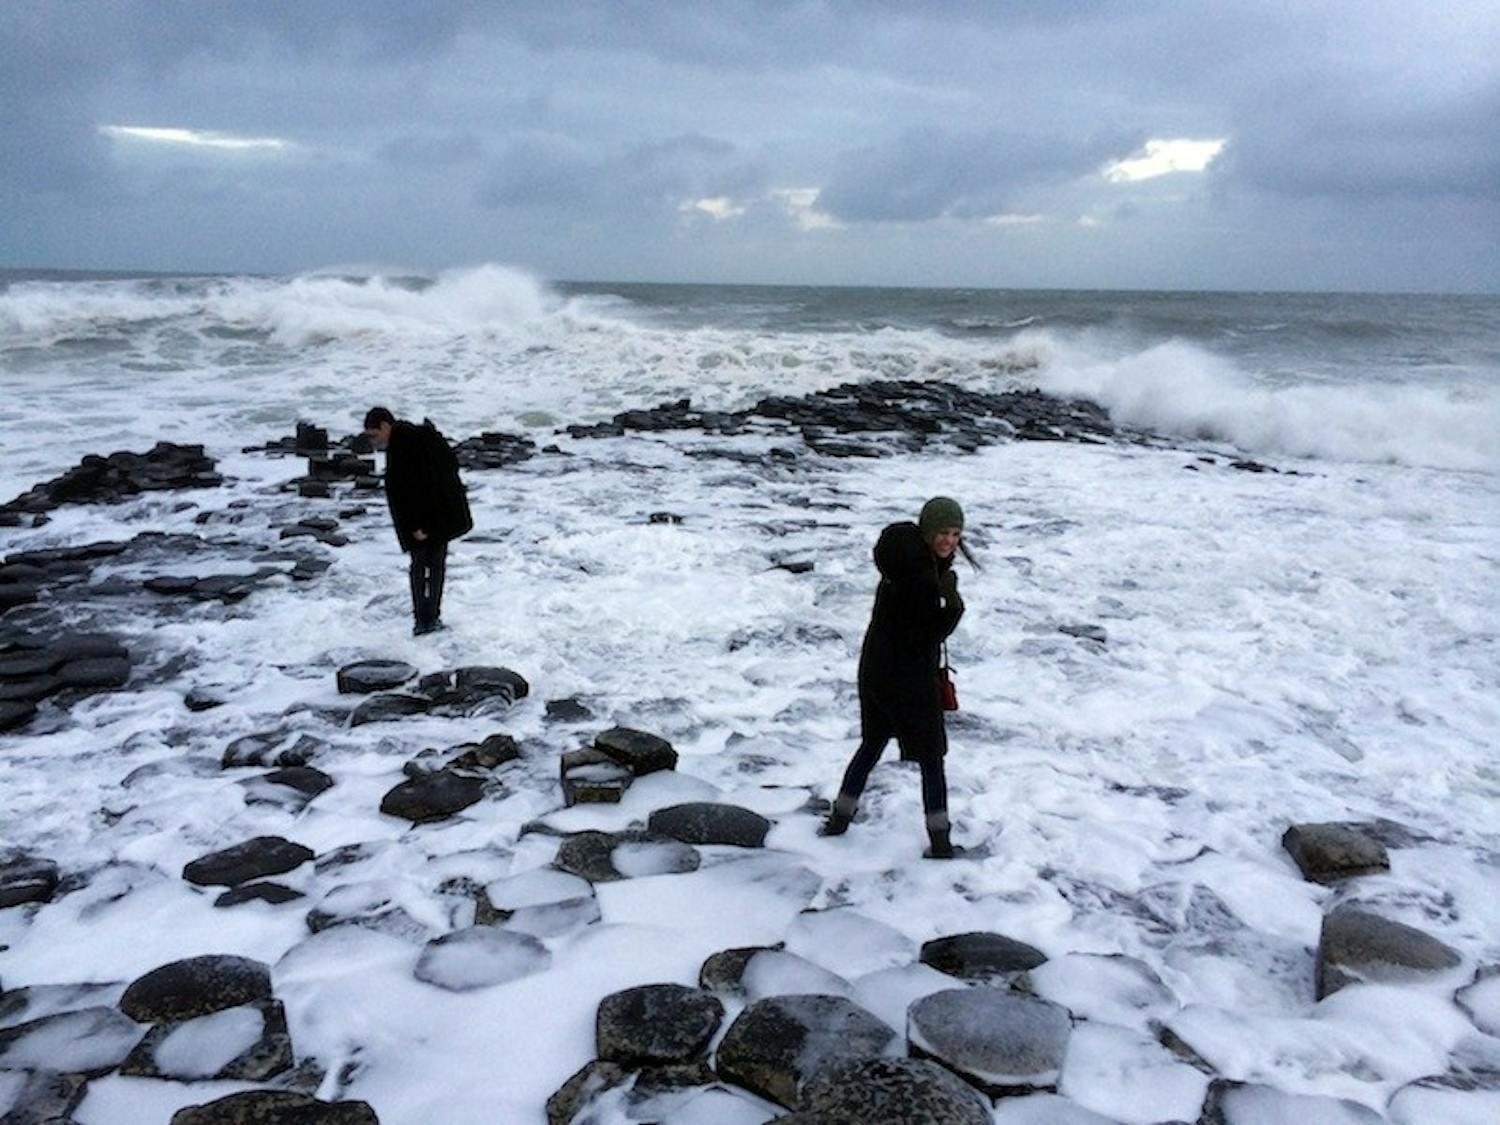 Students in Public Policy 85 take a dip at the Giant's Causeway in Northern Ireland